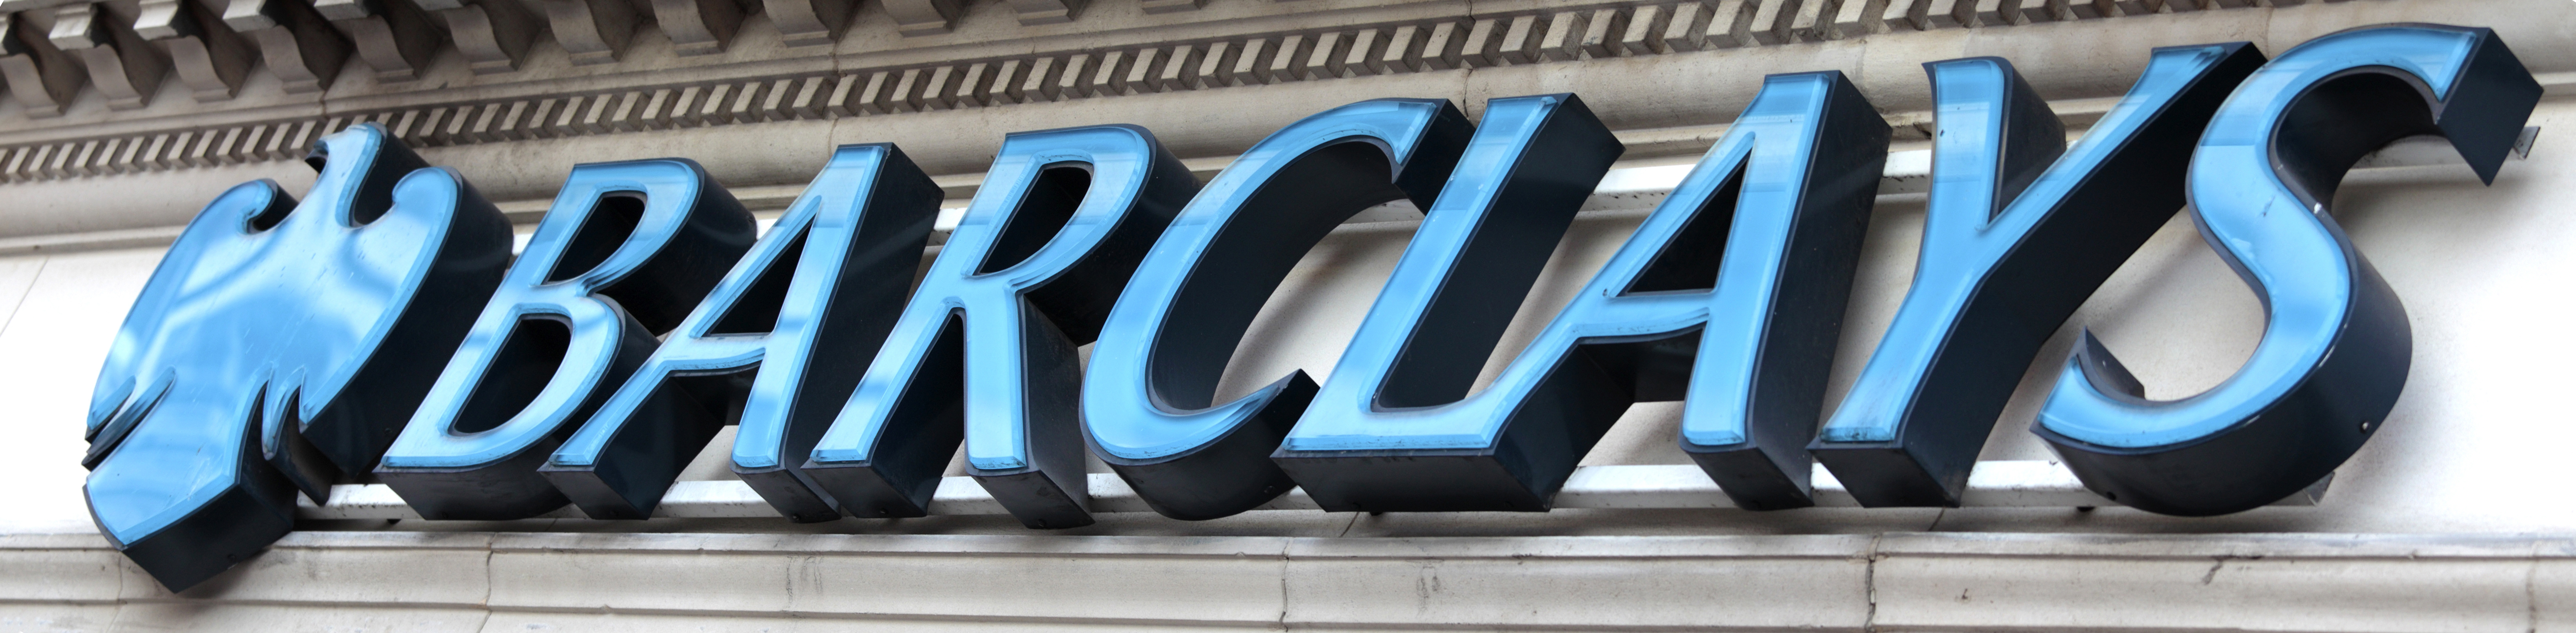 Barclays sign on London Branch. 